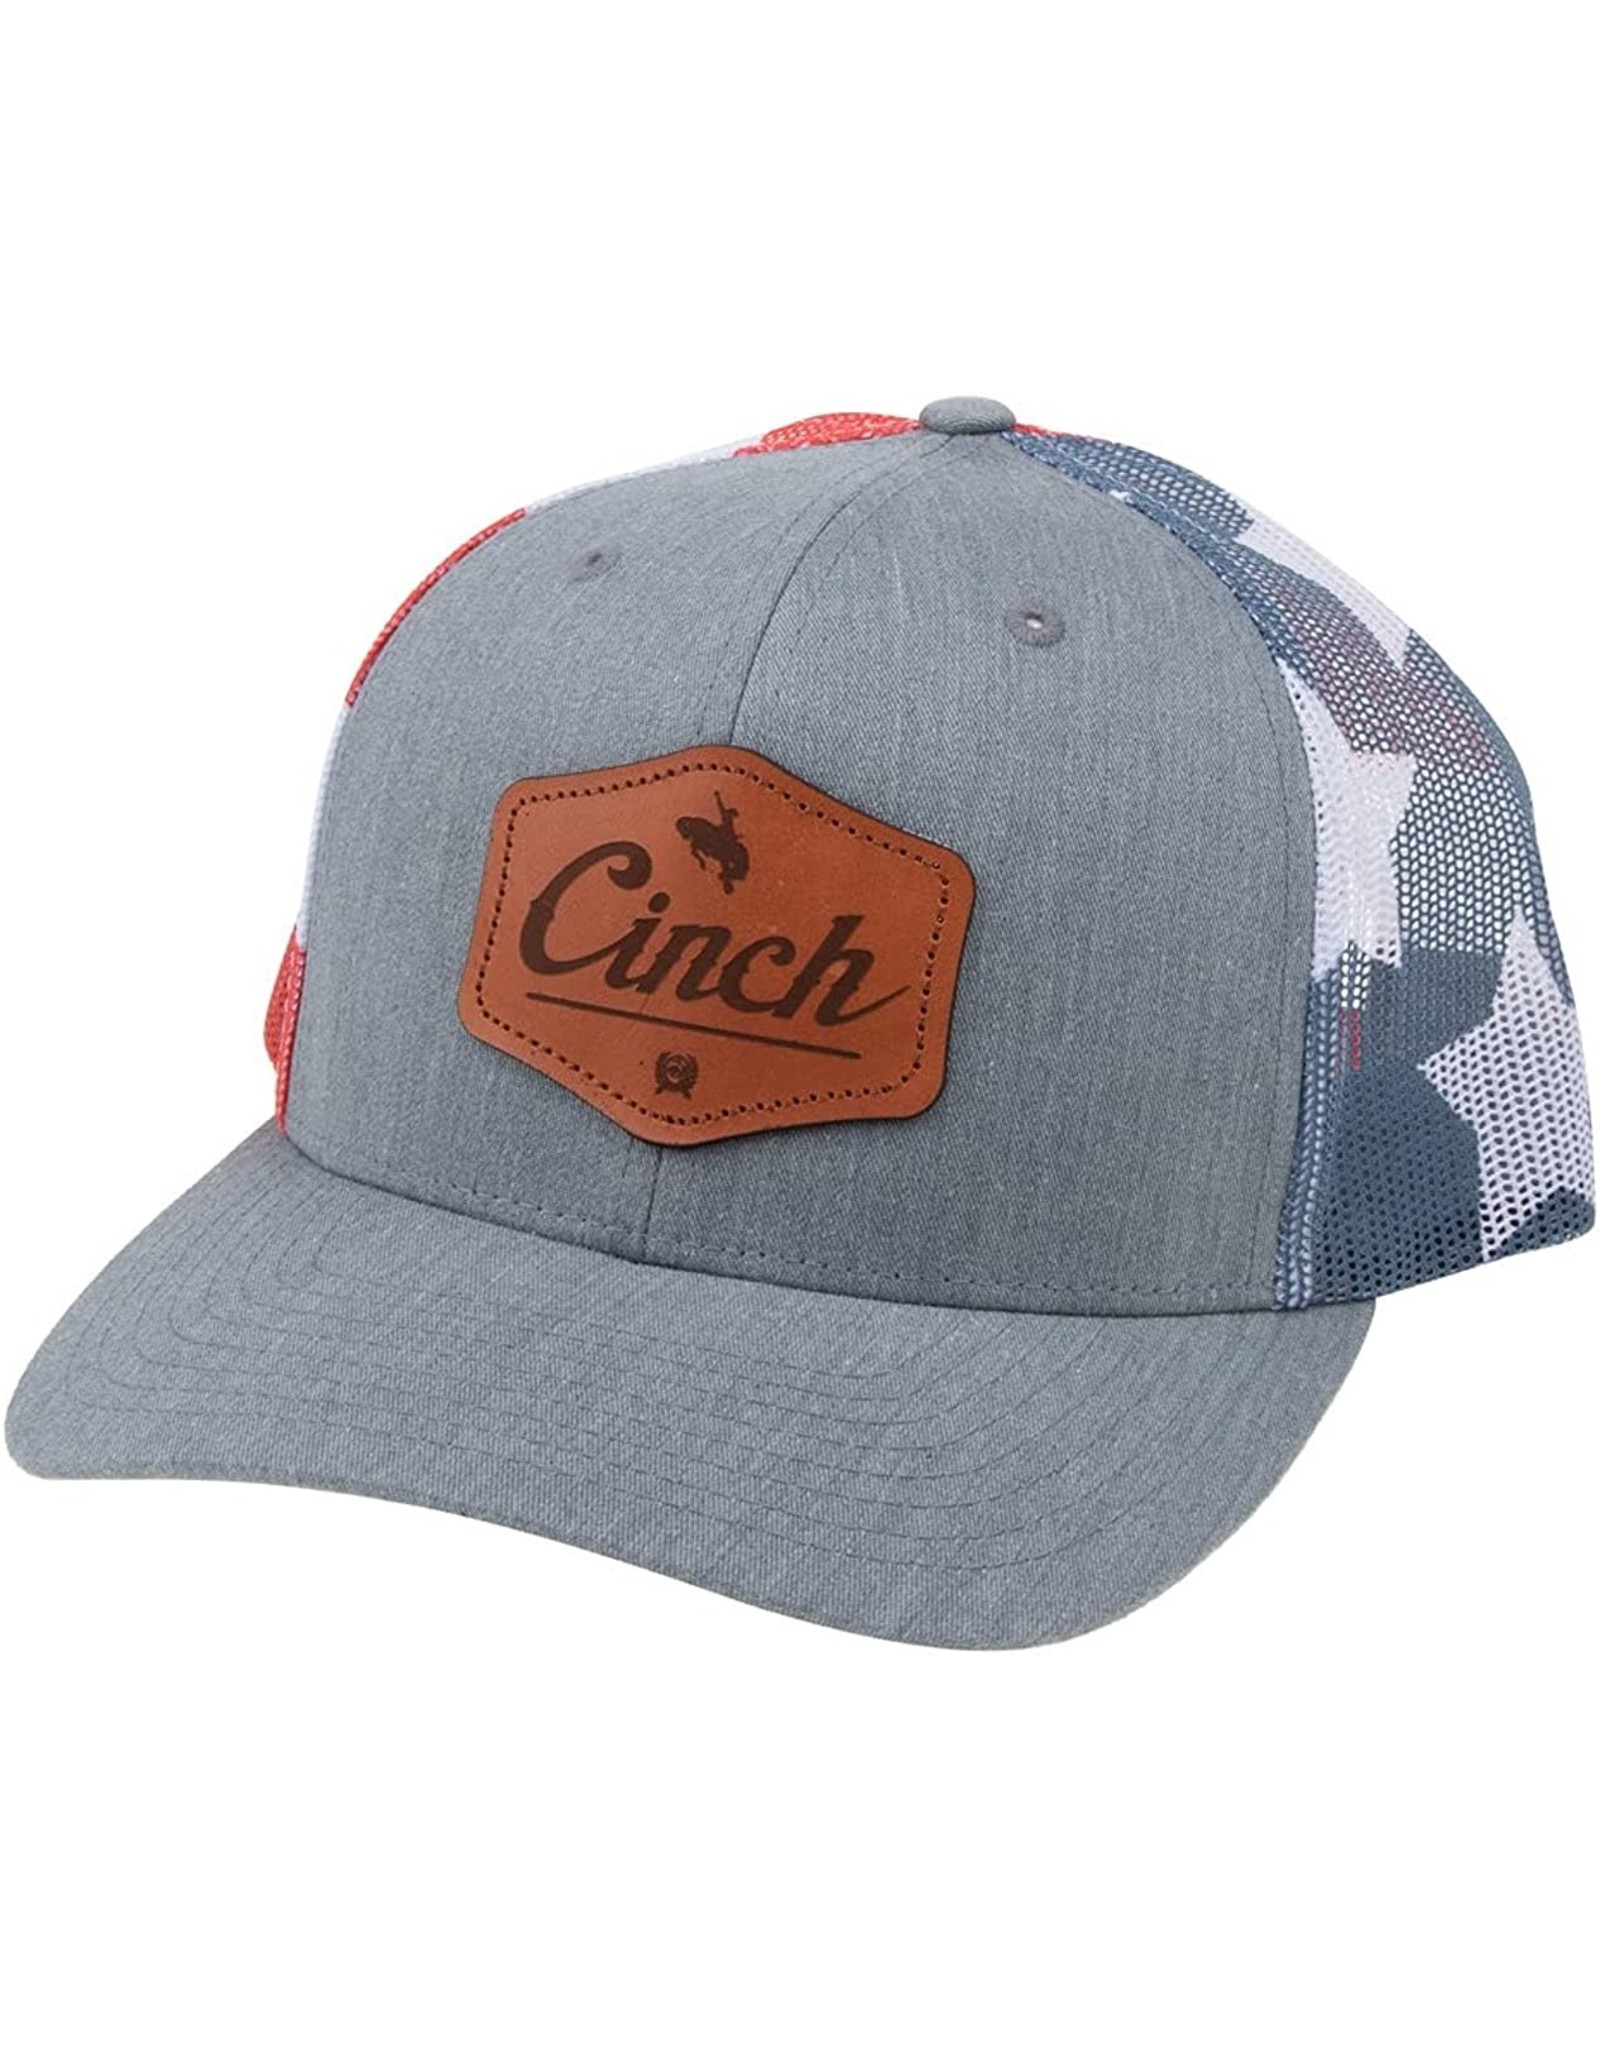 Cinch Mens Flag Leather Patch MCC0800009 Trucker Hat